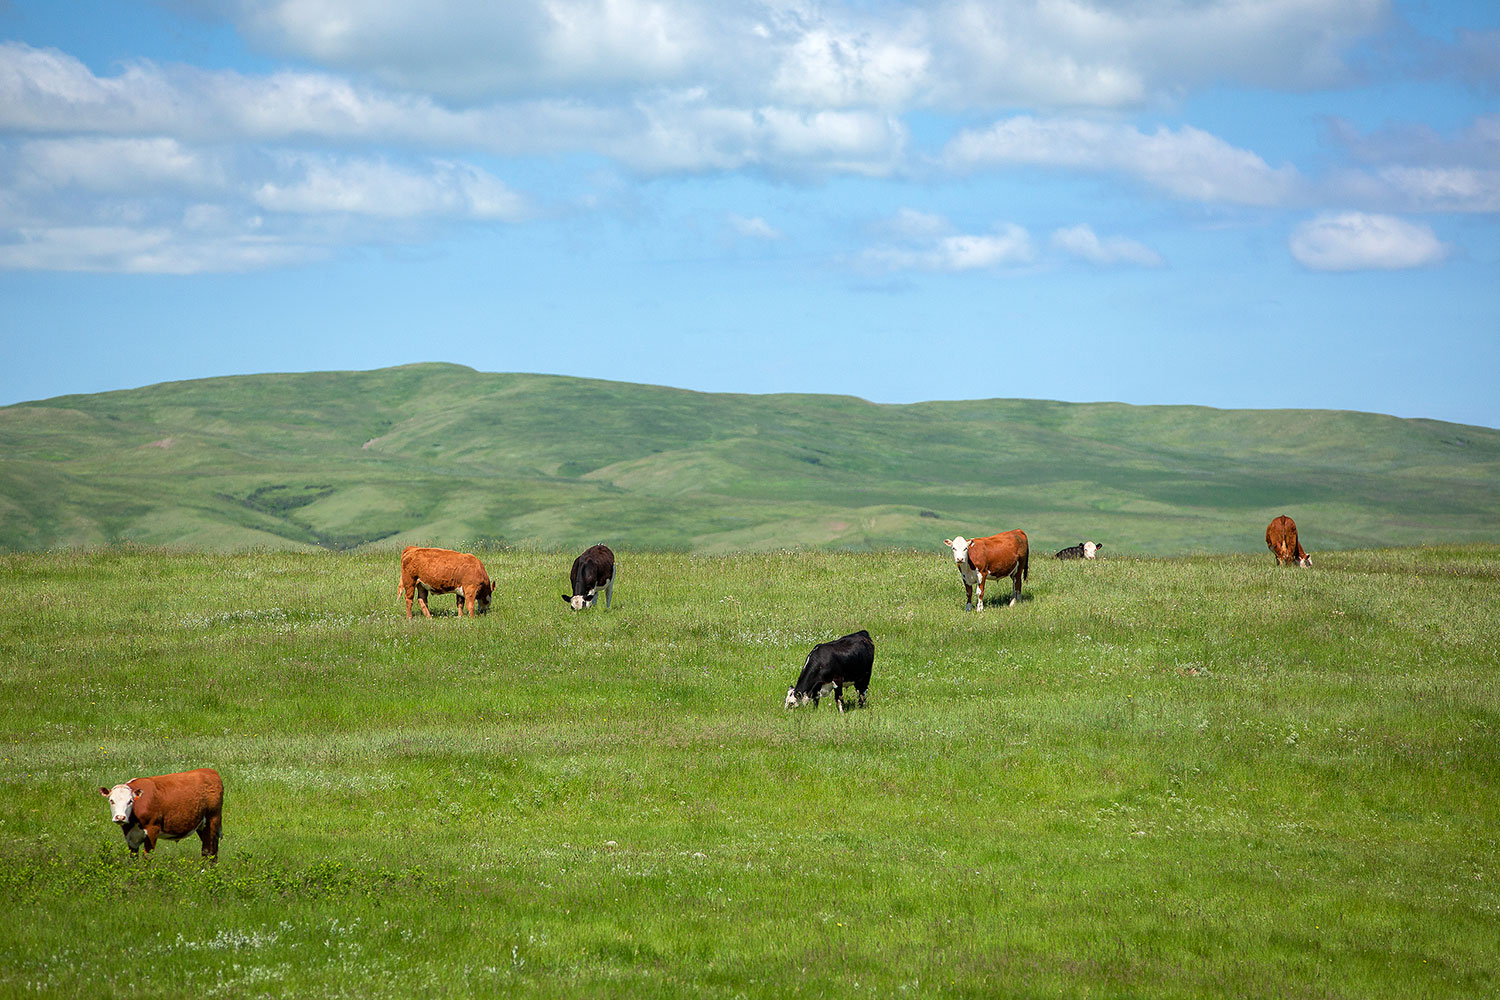 Cows grazing on the wide open, green plains near Chinook, Montana.&nbsp;→ Buy a Print